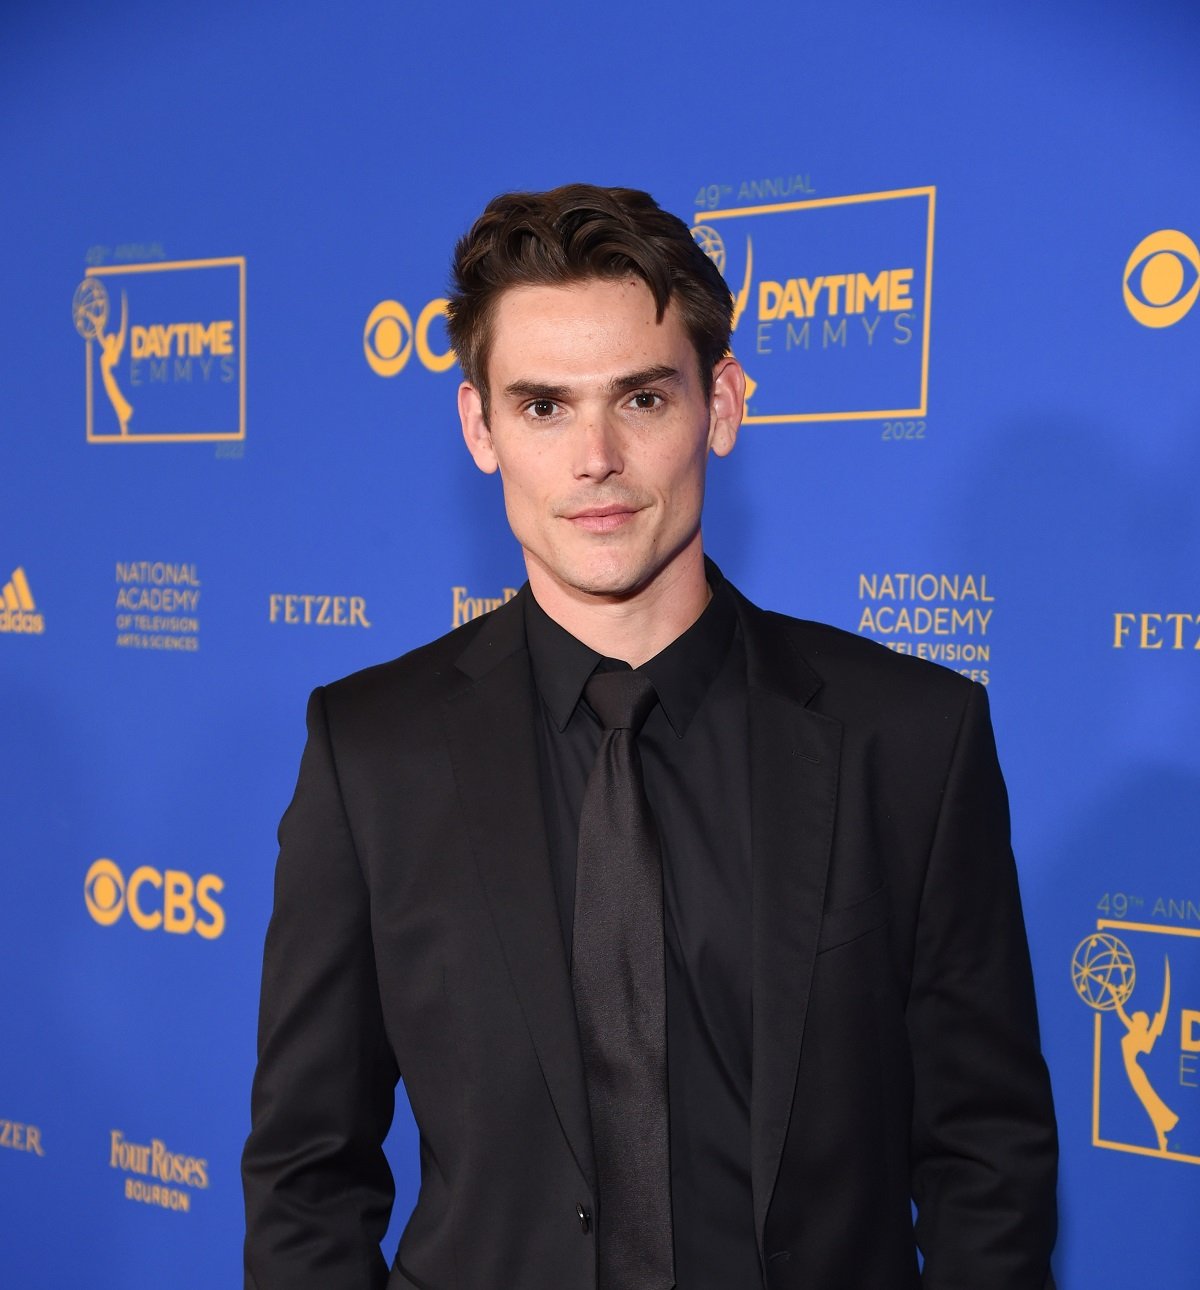 'The Young and the Restless' star Mark Grossman dressed in a black suit; posing on the red carpet of the 2022 Daytime Emmys.